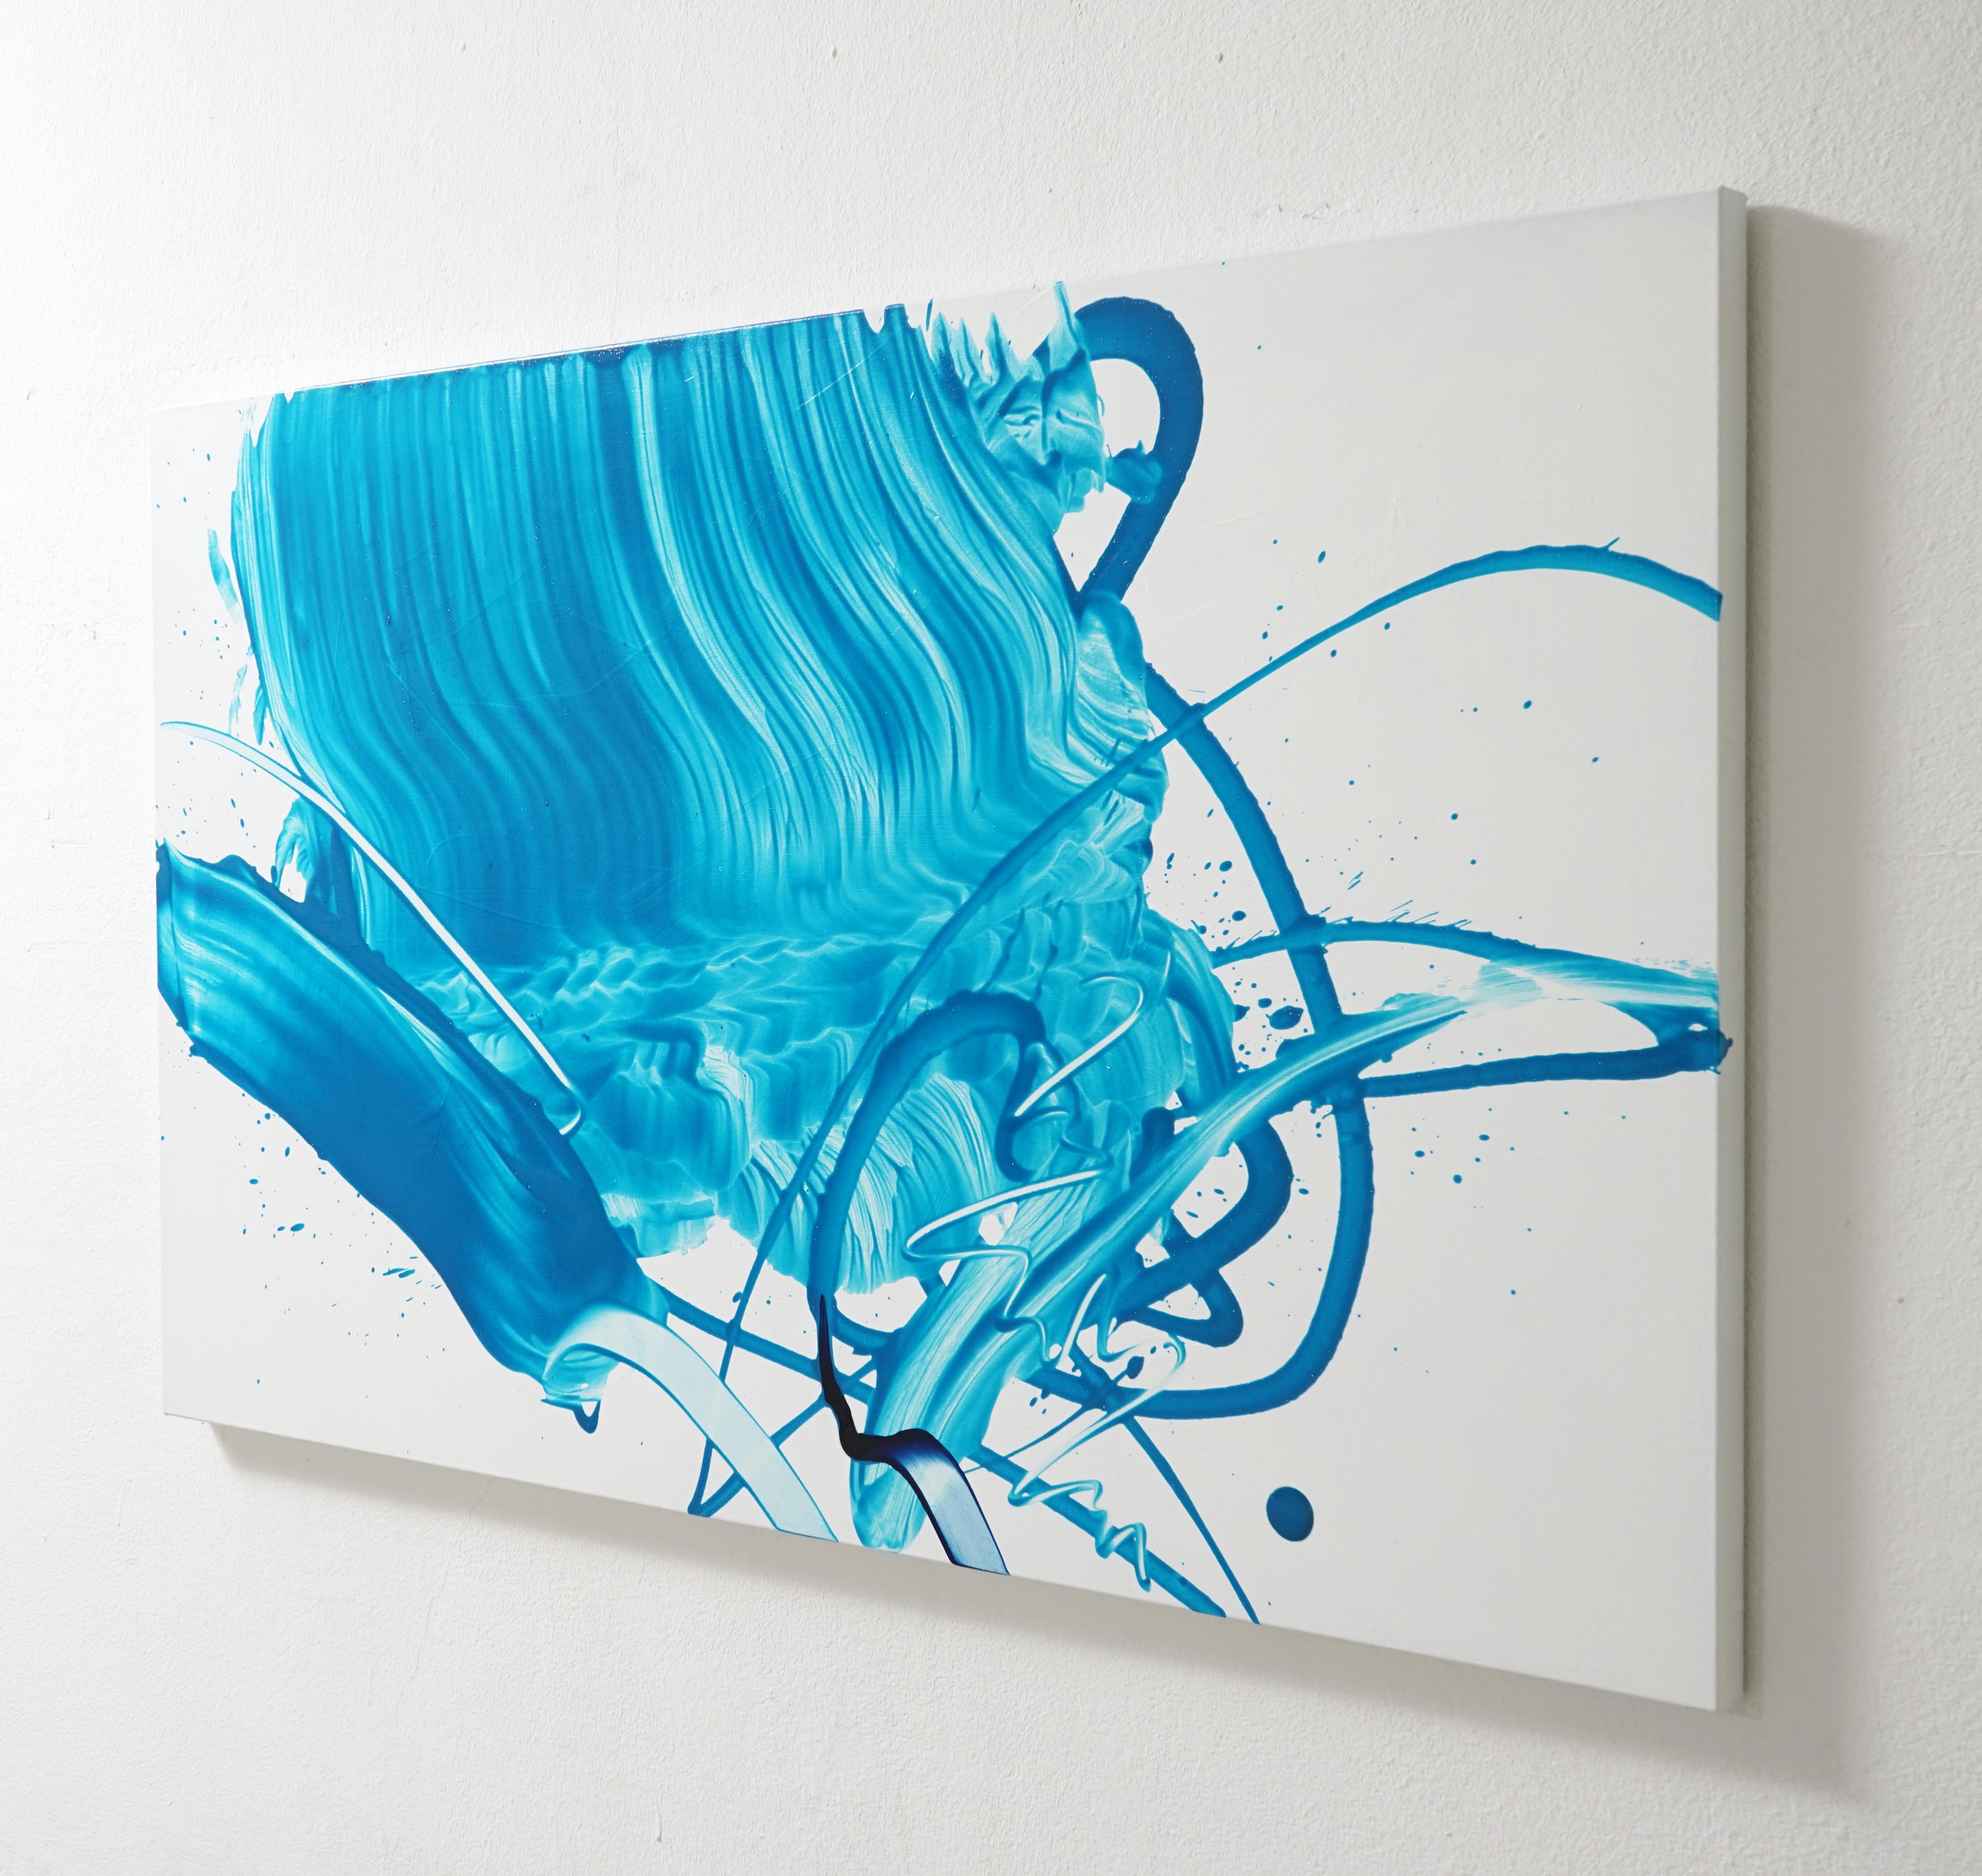 Beginning of the Stop 11-2018 is a vibrant contemporary abstract expressionist art by South Korean artist, Seungyoon Choi. It is a large oil painting on canvas with a strong blue color aesthetic and expressive brush strokes. A dynamic artwork